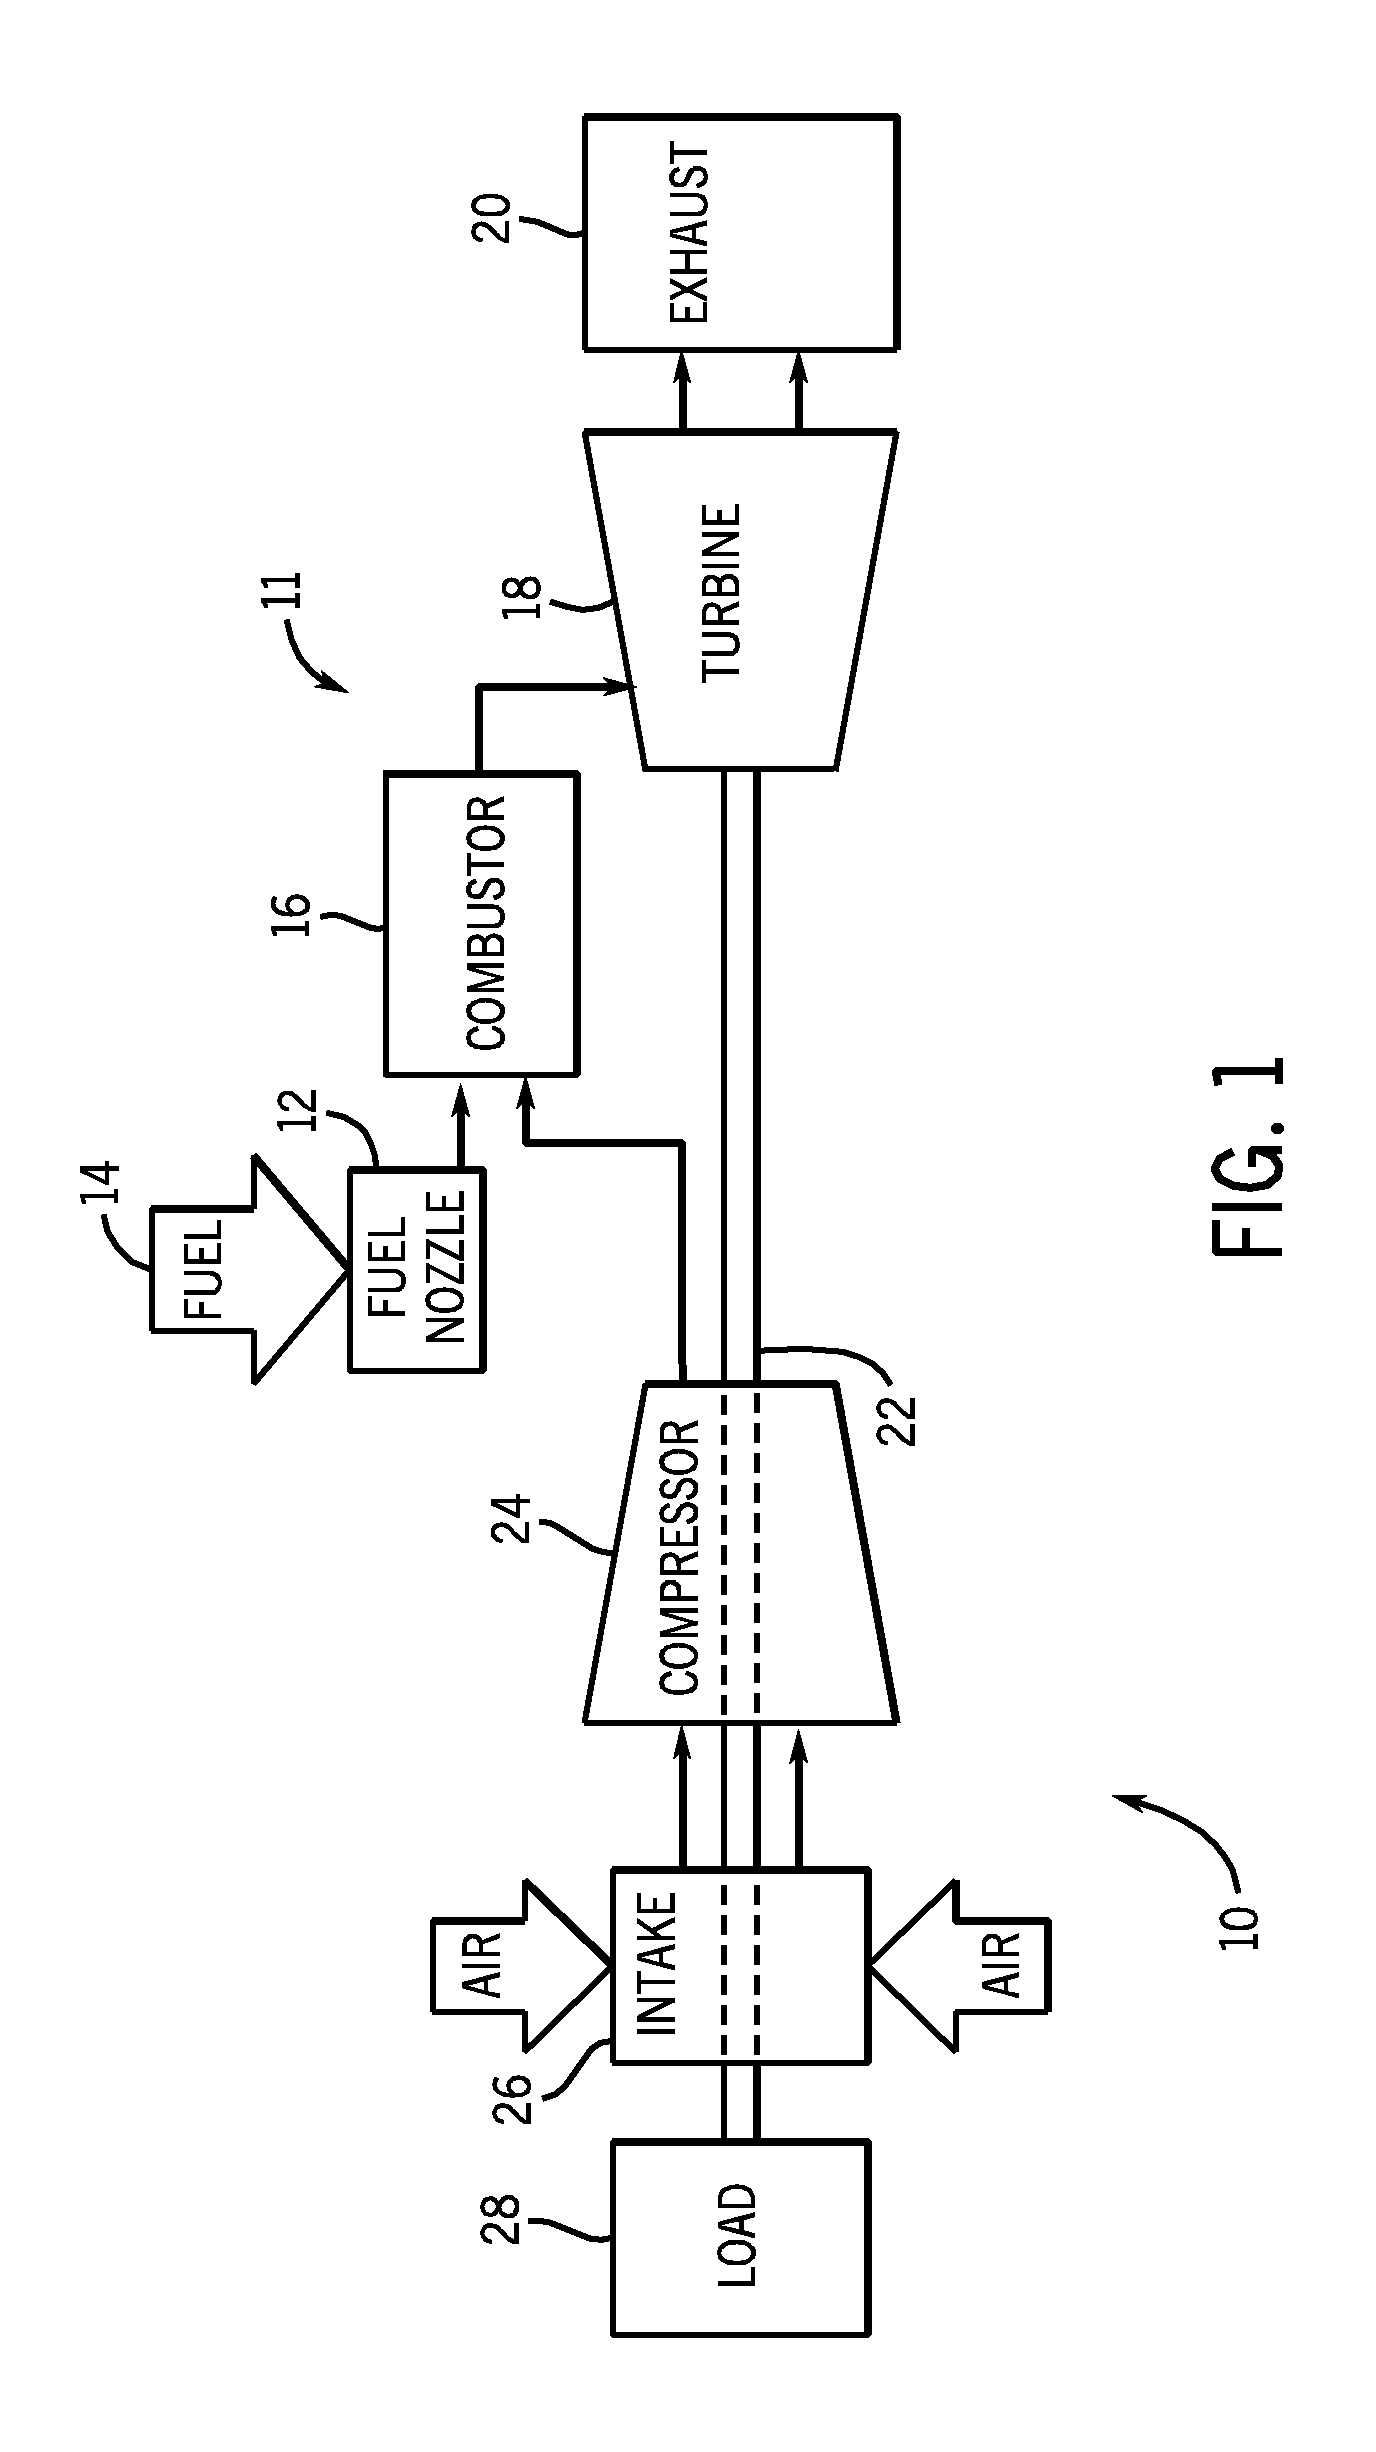 System for premixing air and fuel in a fuel nozzle